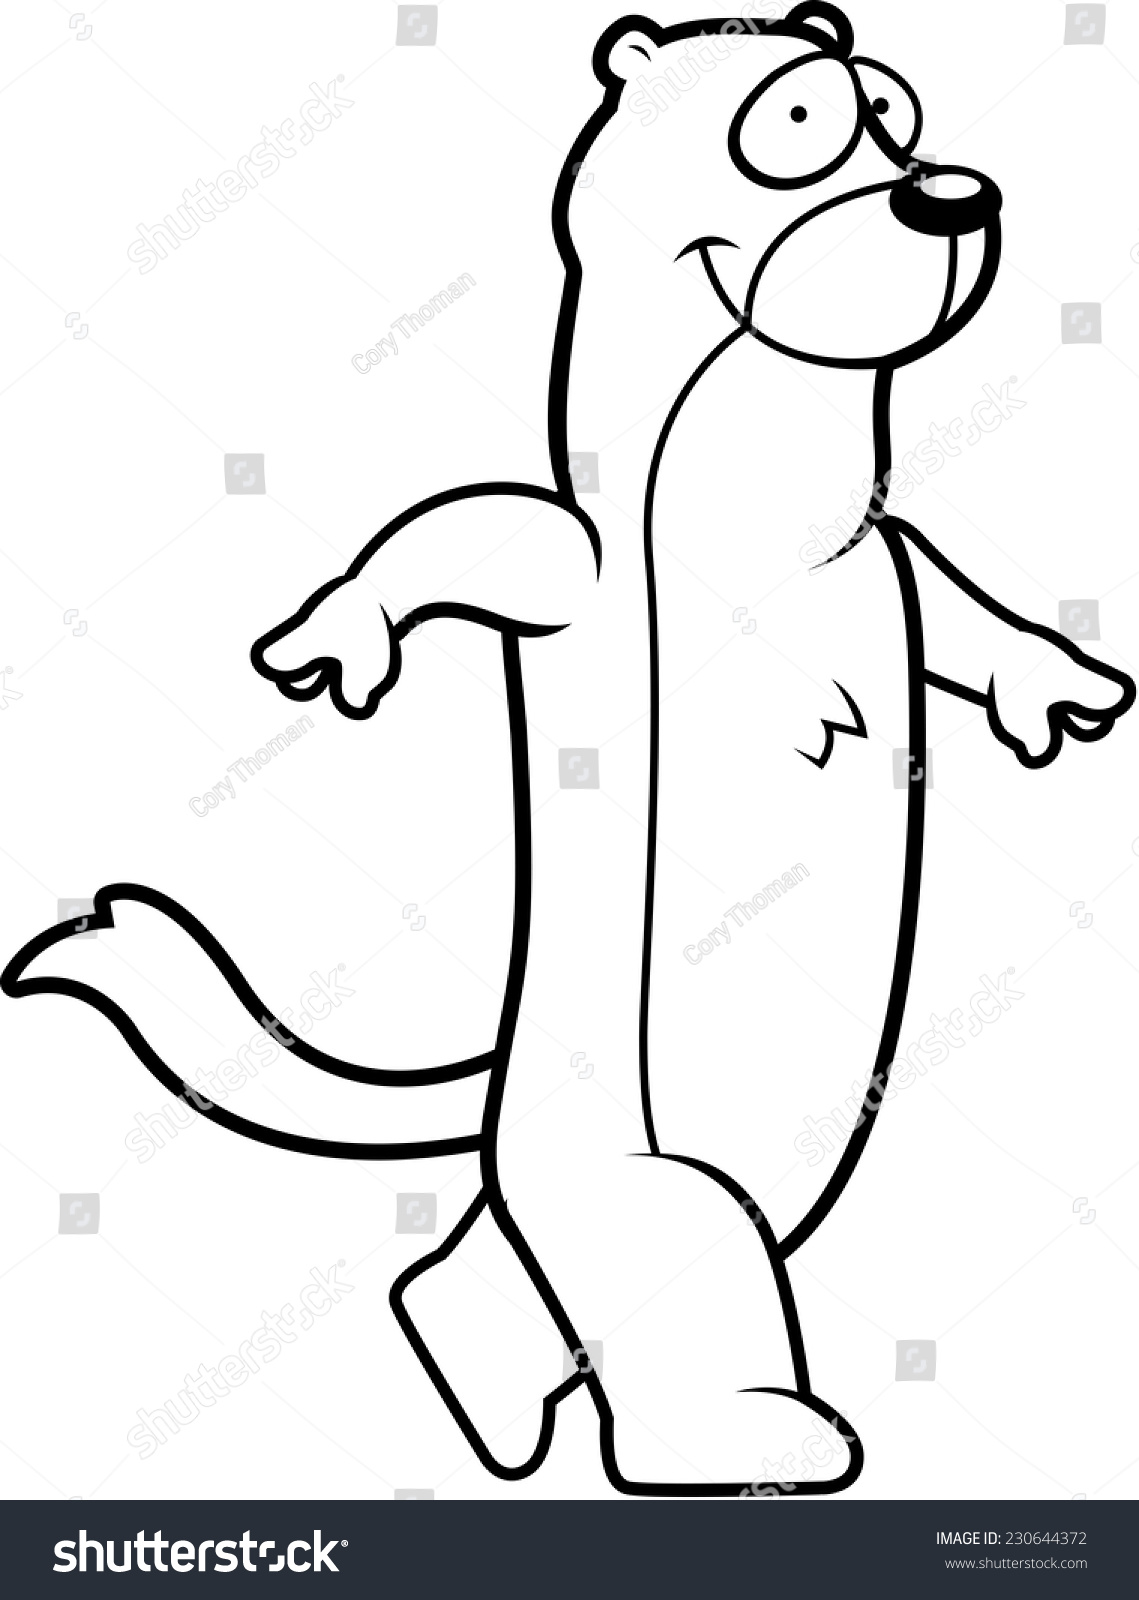 A Happy Cartoon Weasel Walking And Smiling. Stock Vector Illustration